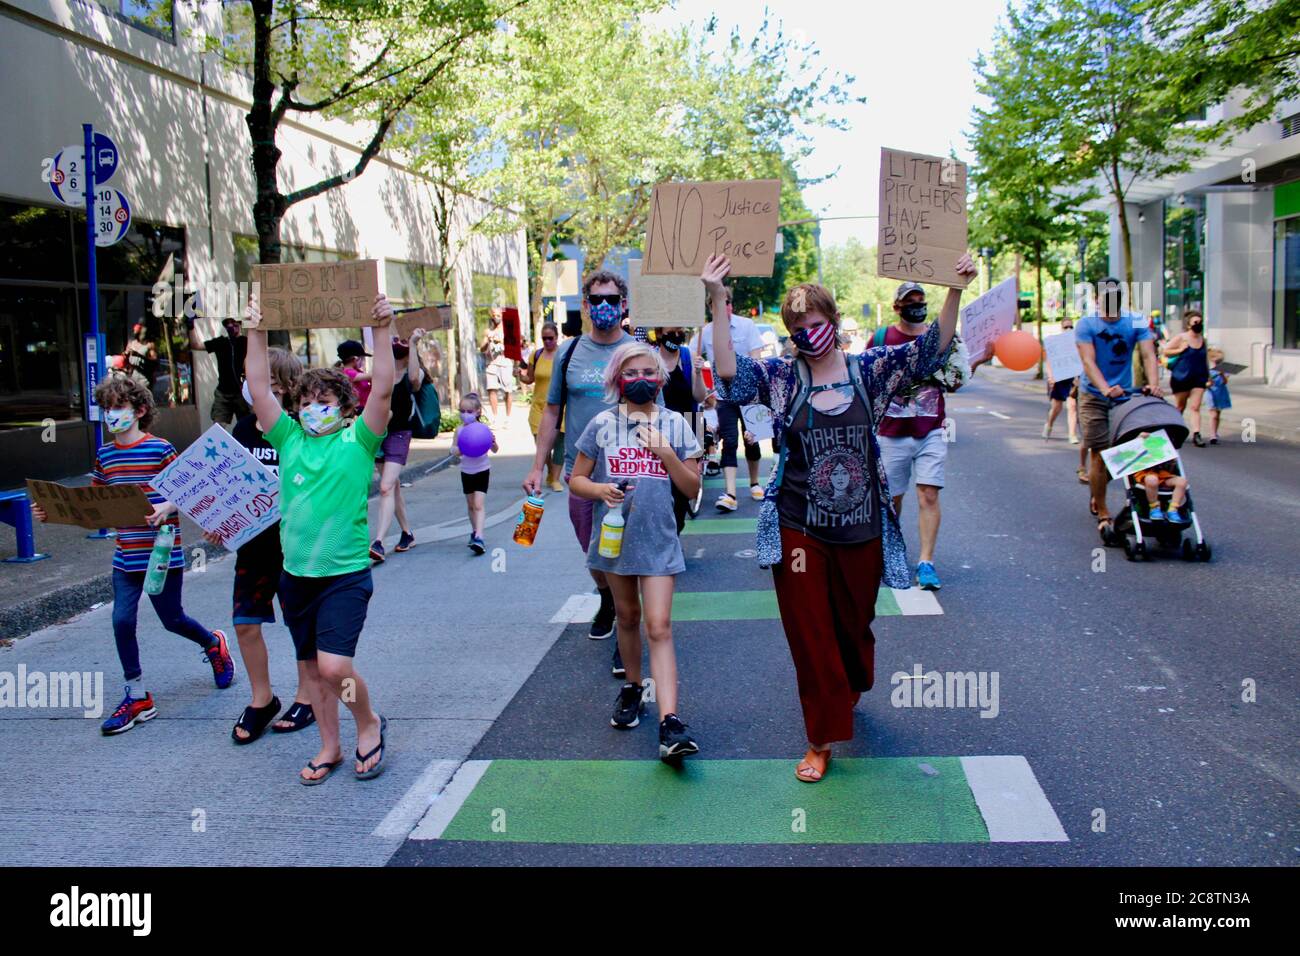 Portland, Oregon, USA. 26th July, 2020. Kids and their parents marched today as part of "Families Demanding Feds Out of Portland"" an event organized by ."Raising Antiracist Kids PDX.""The march began at Salmon St. Fountain and ended at the Justice Center/Court house, where a young African American teen gave a heart-felt speech about equality and freedom. It was meant to "show the strength of local families who don't want DHS goons invading the city"", according to the Facebook page. Credit: Amy Katz/ZUMA Wire/Alamy Live News Stock Photo